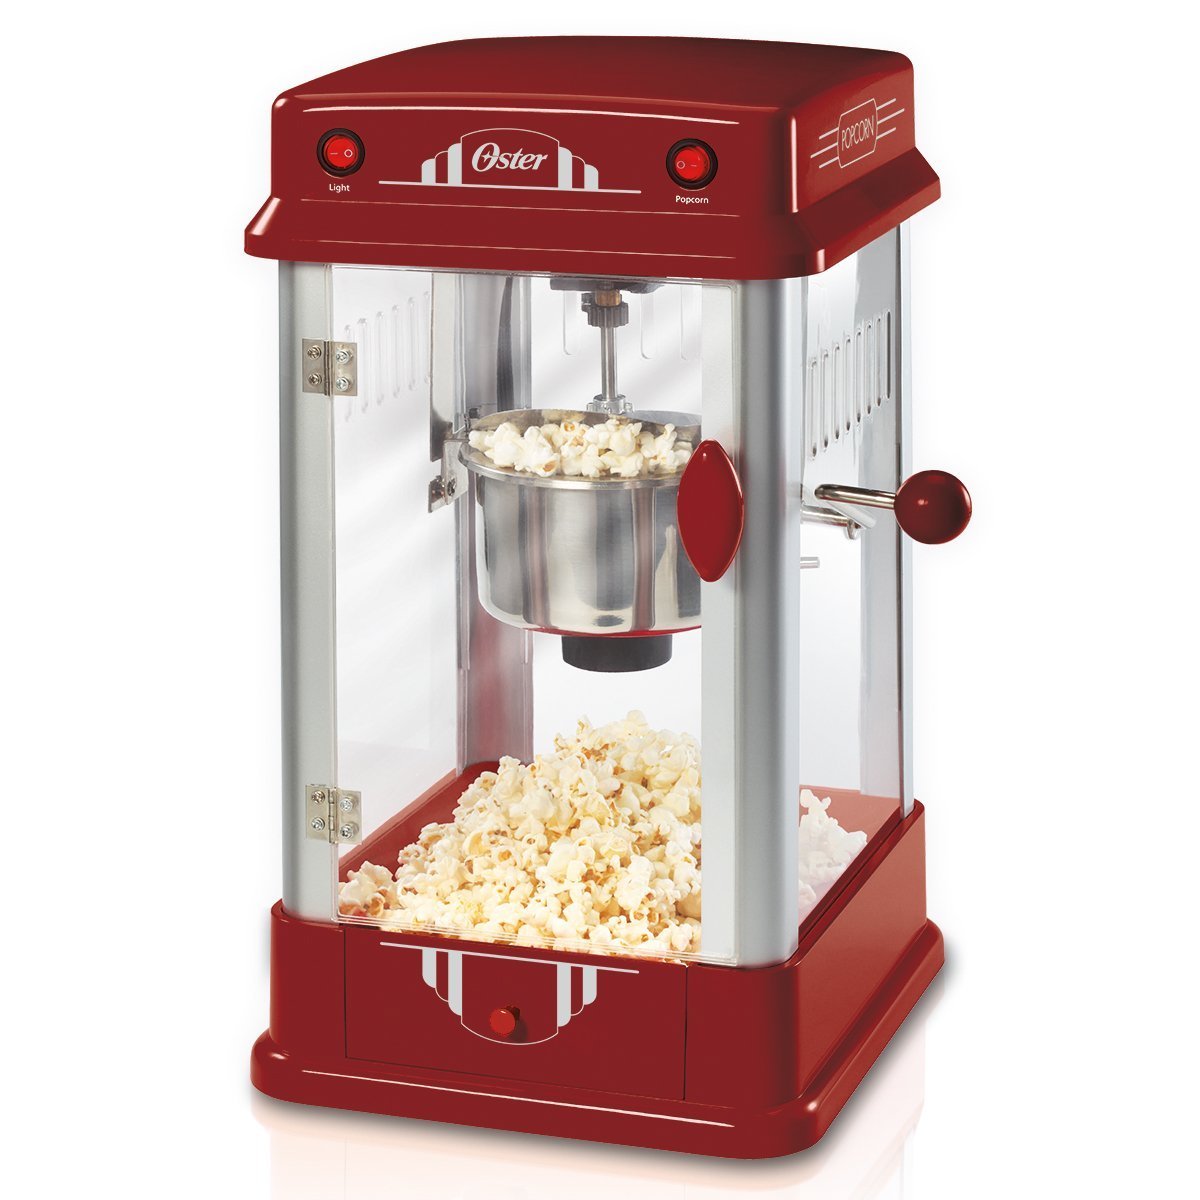 Oster FPSTPP7310-052 Theater Style Popcorn Maker, 220 Volts (Not for U